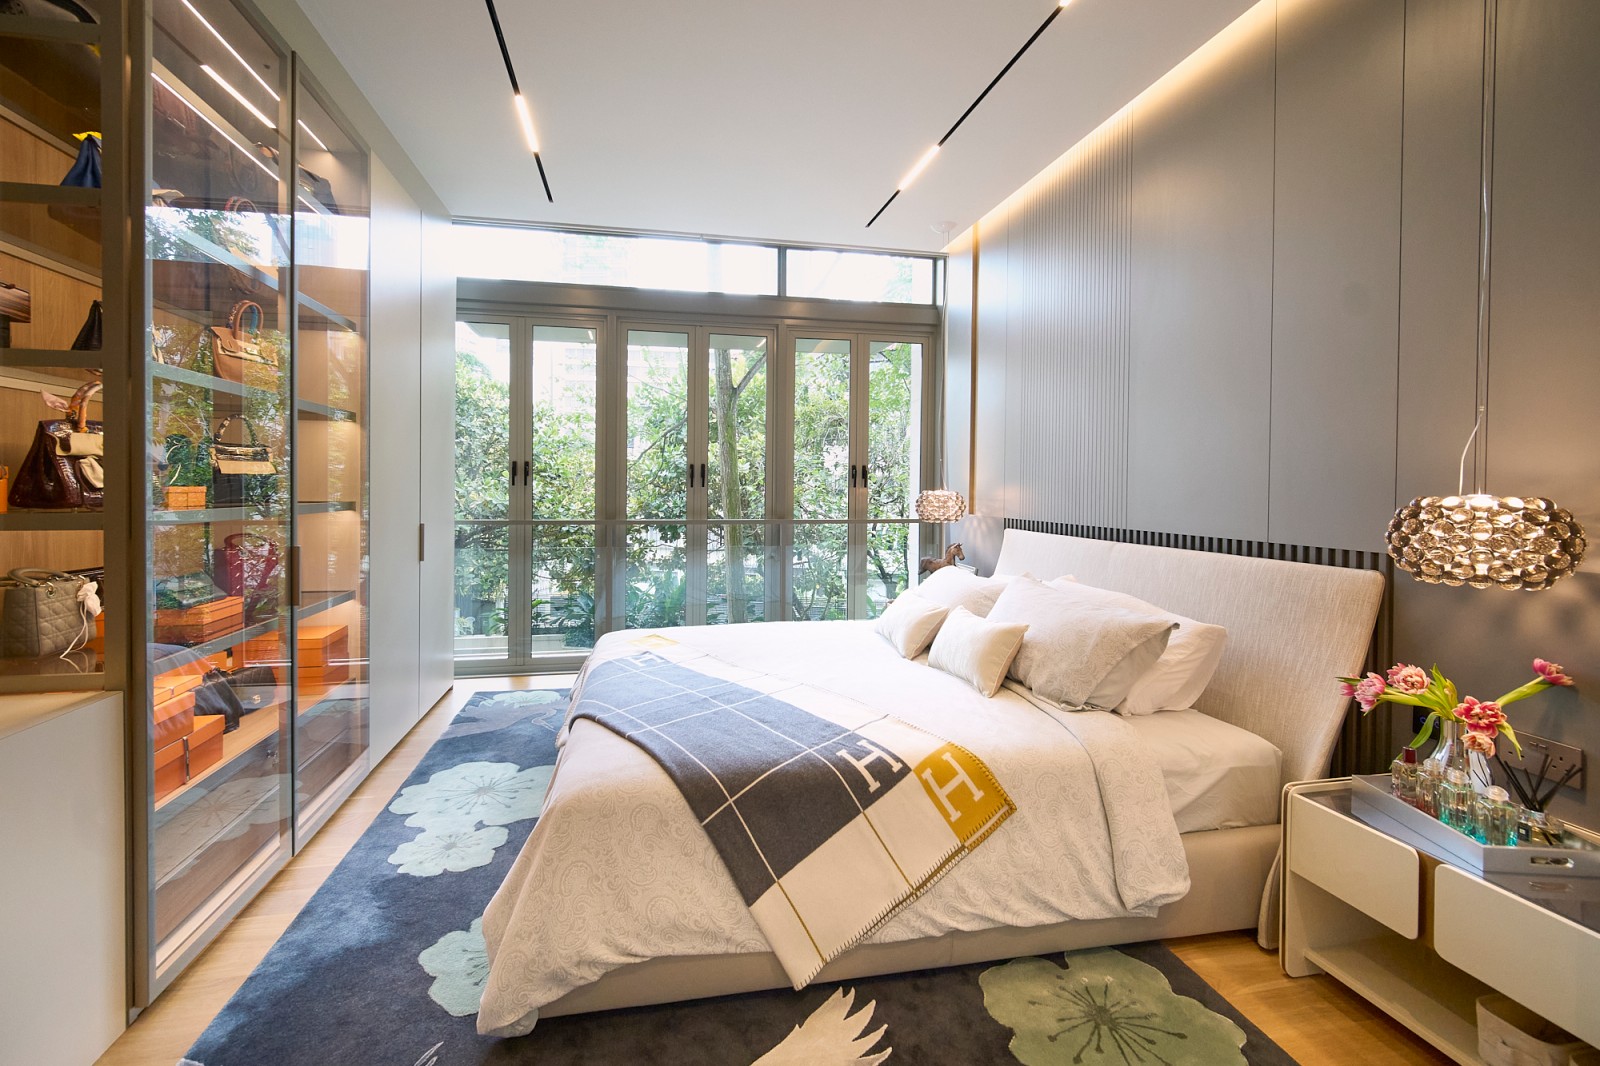 Tanglin Residences by Tony Poh and Cathryn Ling